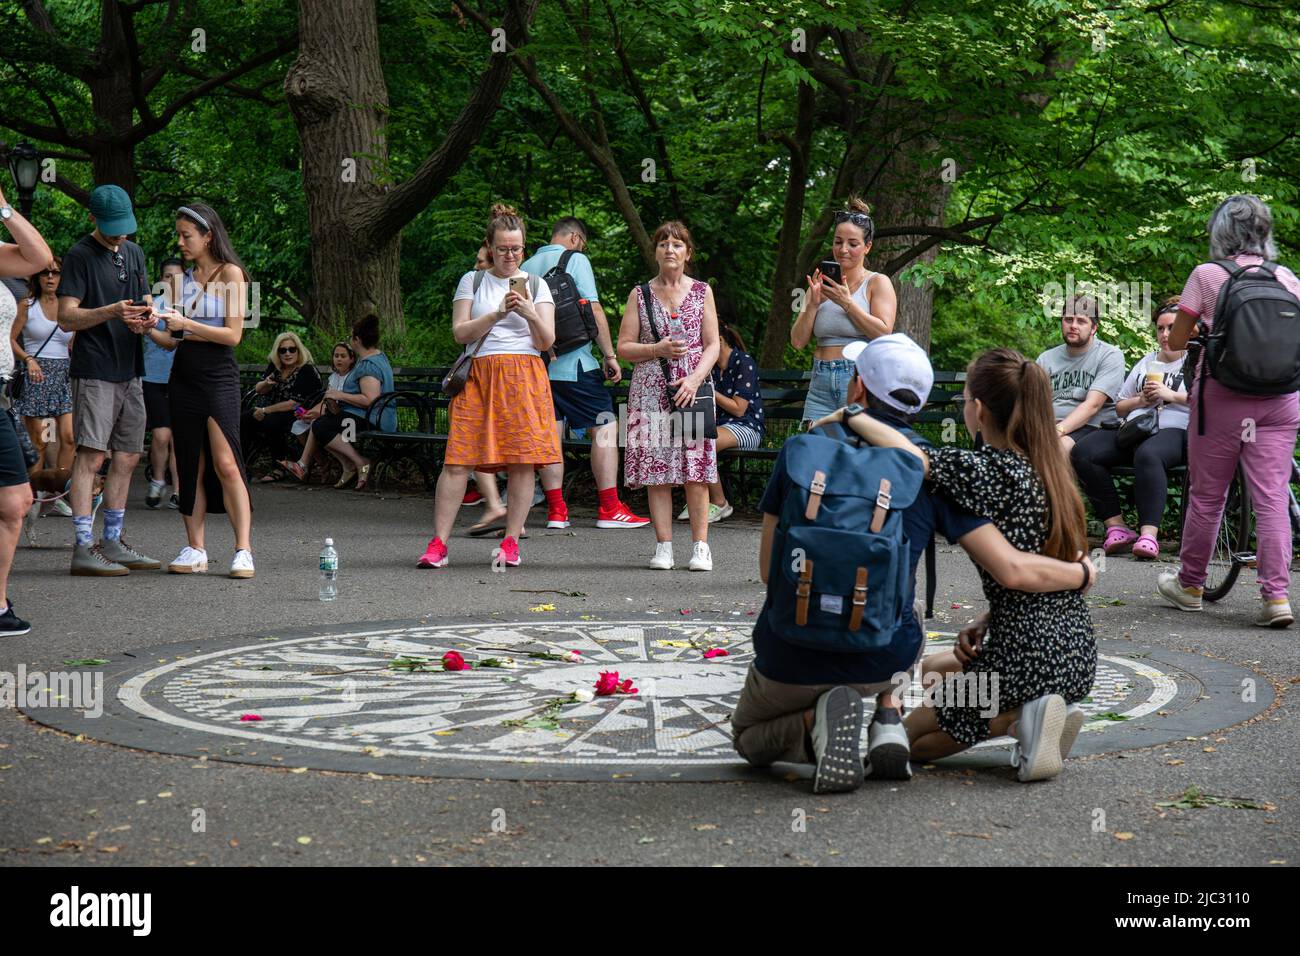 Tourists taking pictures at John Lennon memorial or Imagine Mosaic in Central Park, New York City, United States of America Stock Photo